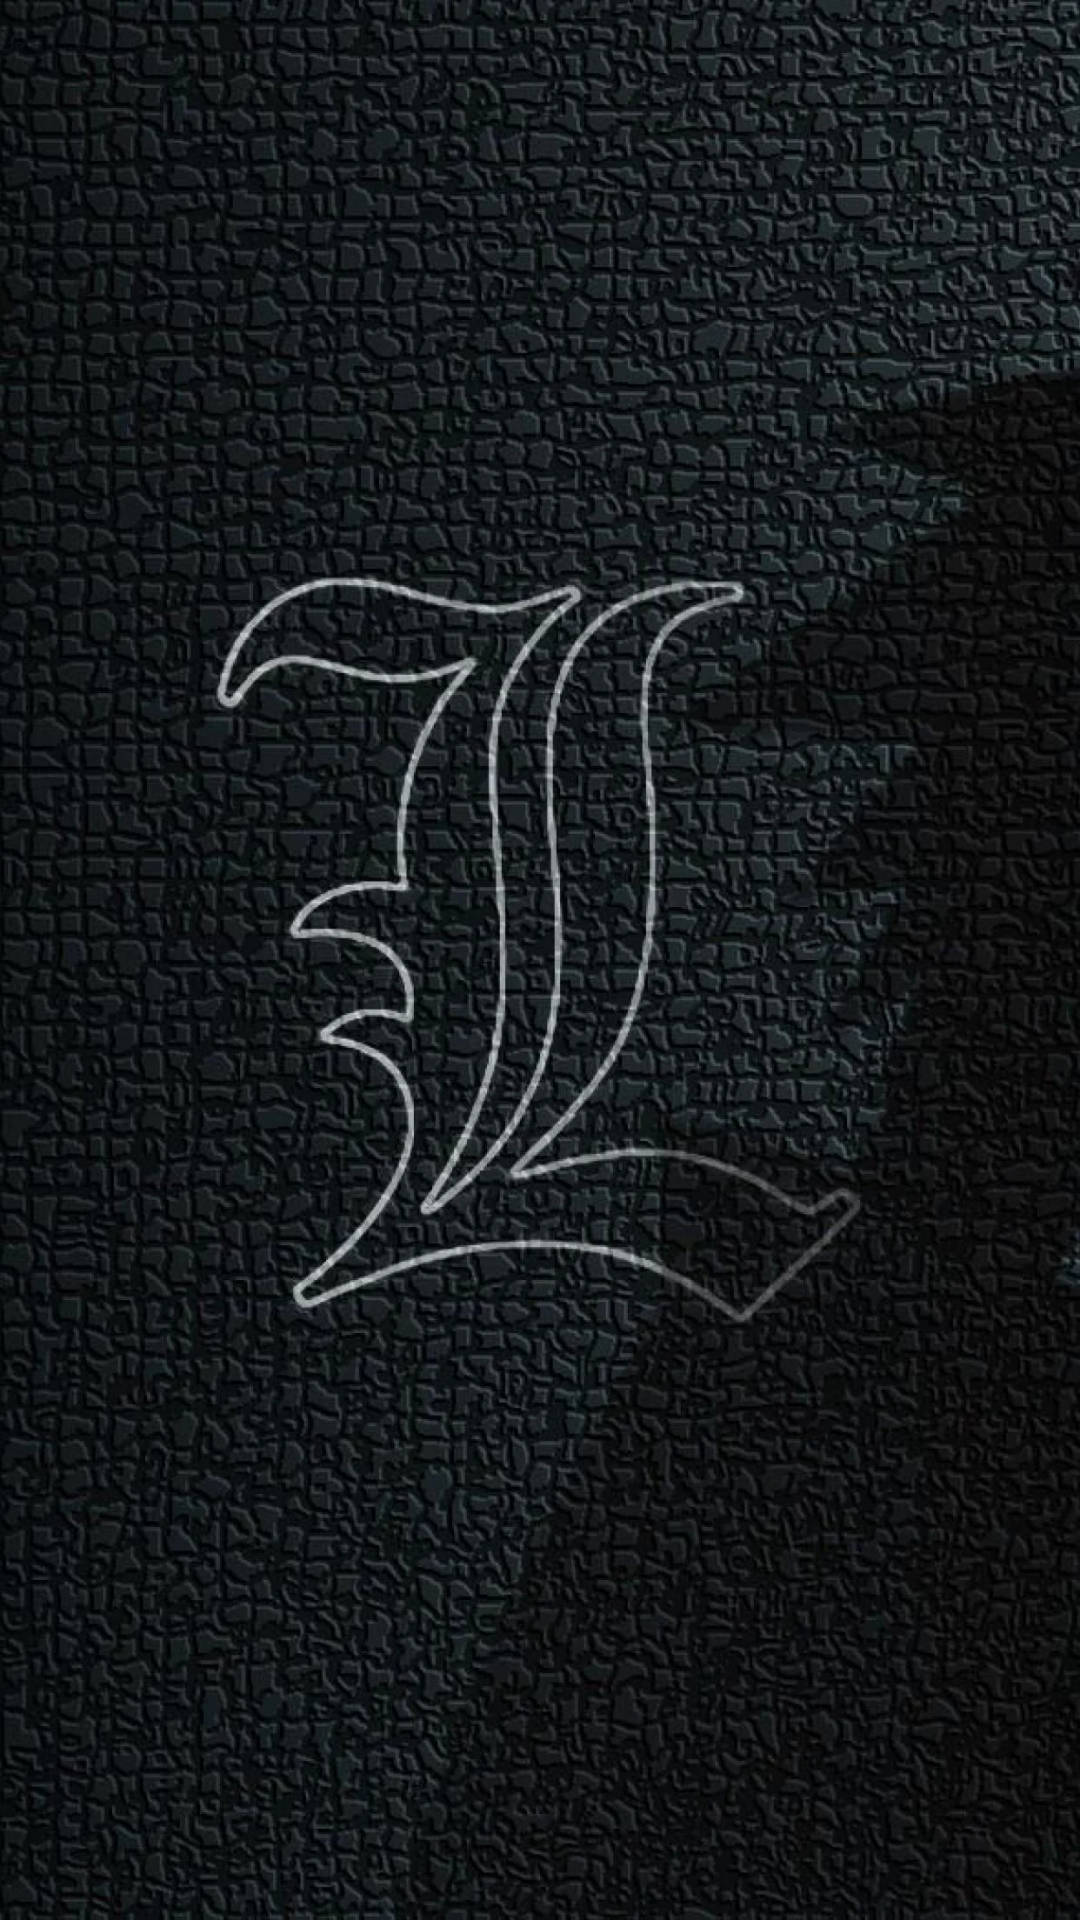 Lawliet’s Symbol On Death Note iPhone Wallpaper